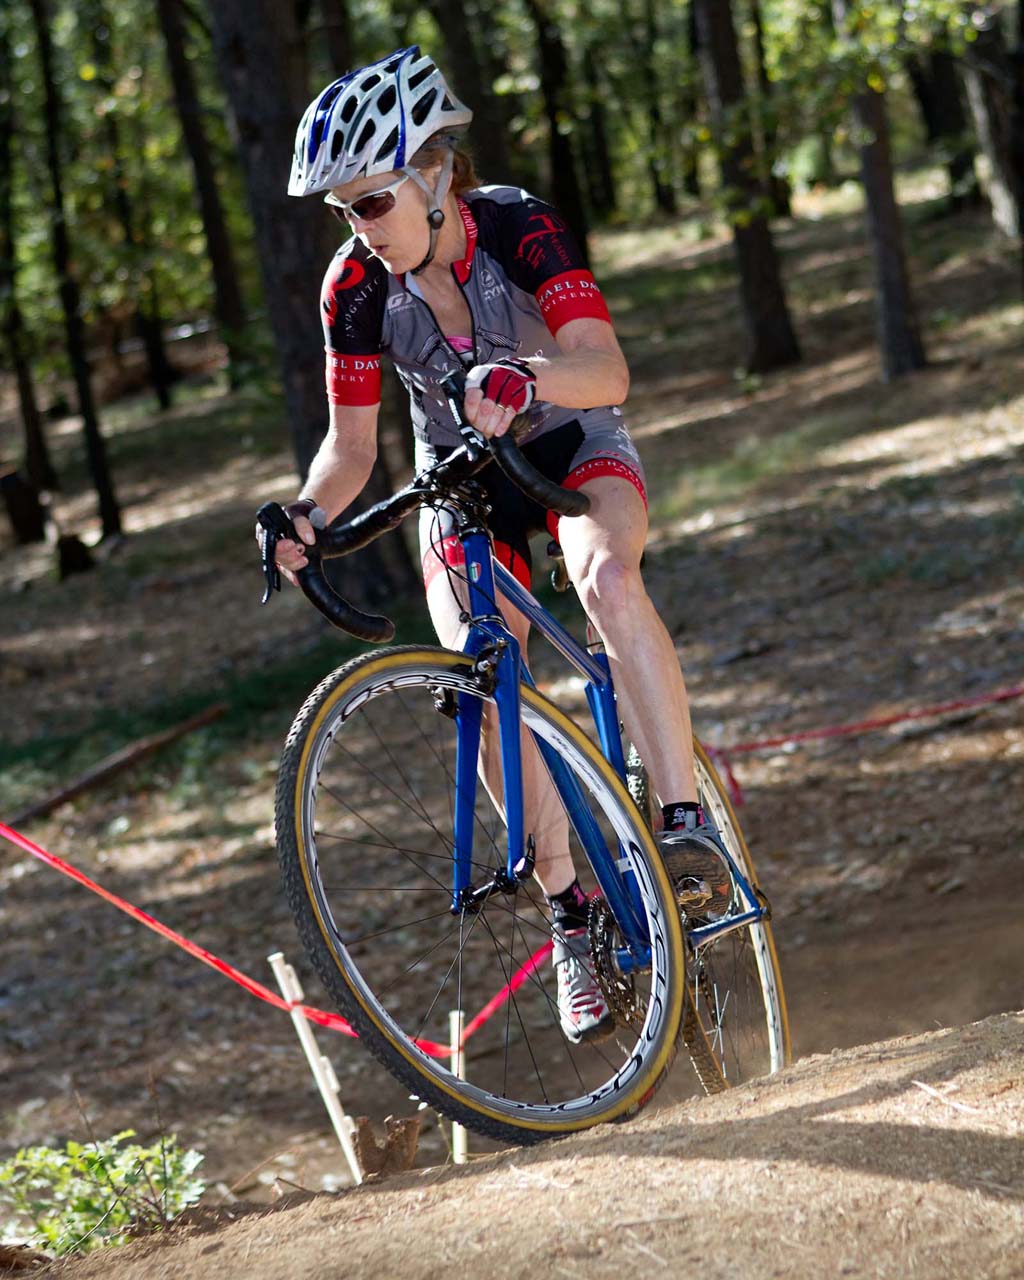 Lauren Liden (Michael David Winery Cycling Team/Delta Velo) riding up one of the steep sections on the course. © Tim Westmore